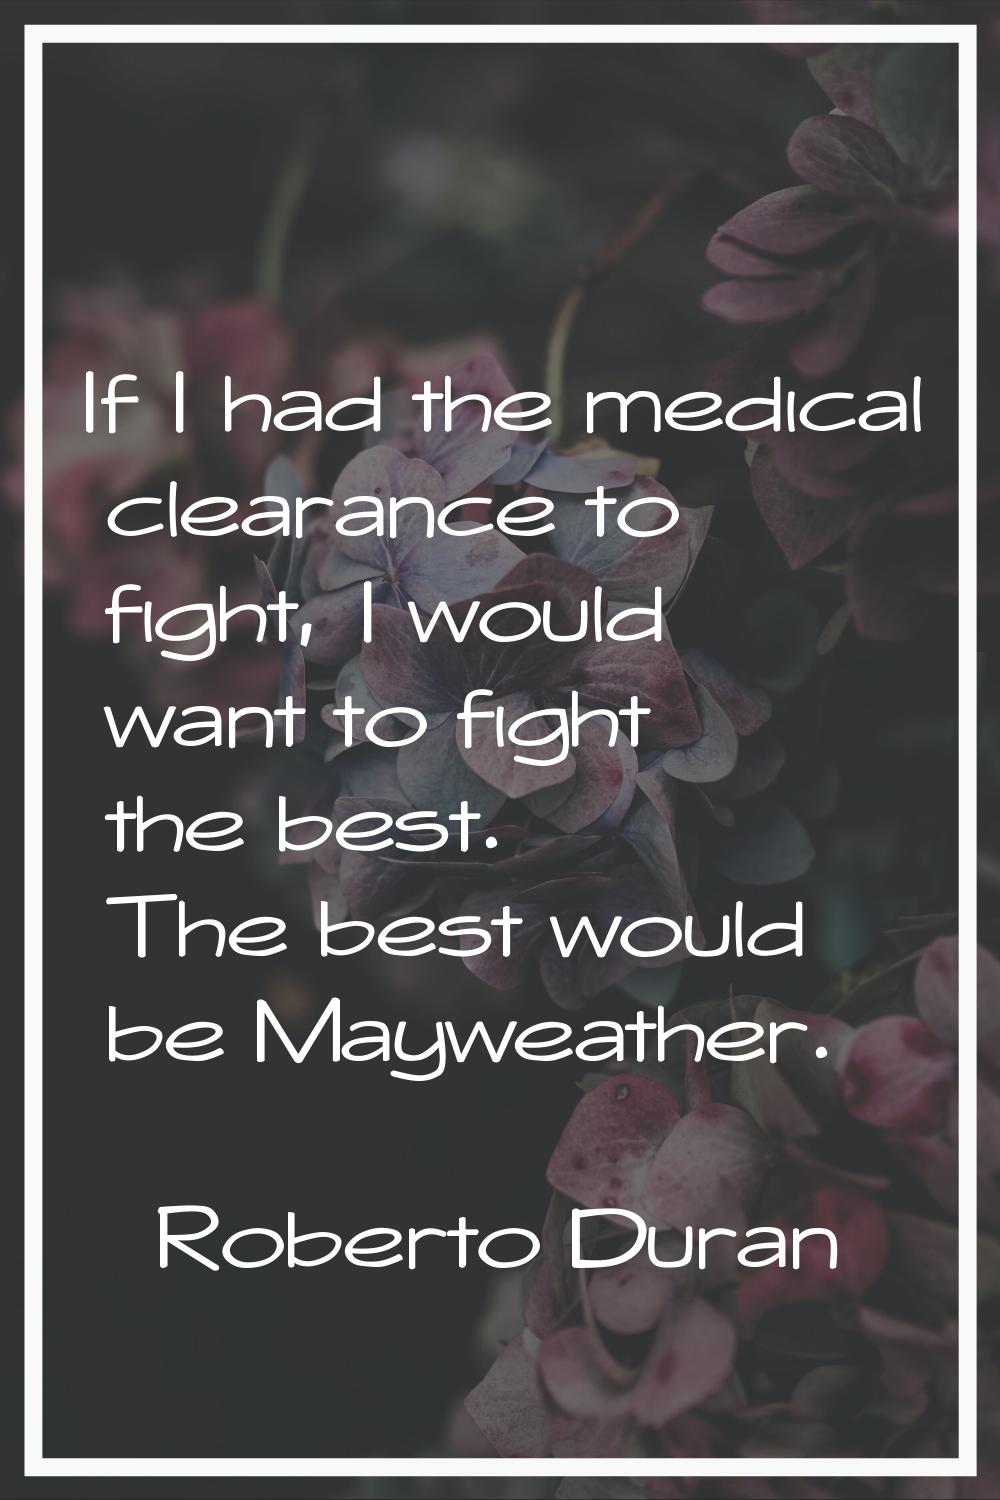 If I had the medical clearance to fight, I would want to fight the best. The best would be Mayweath